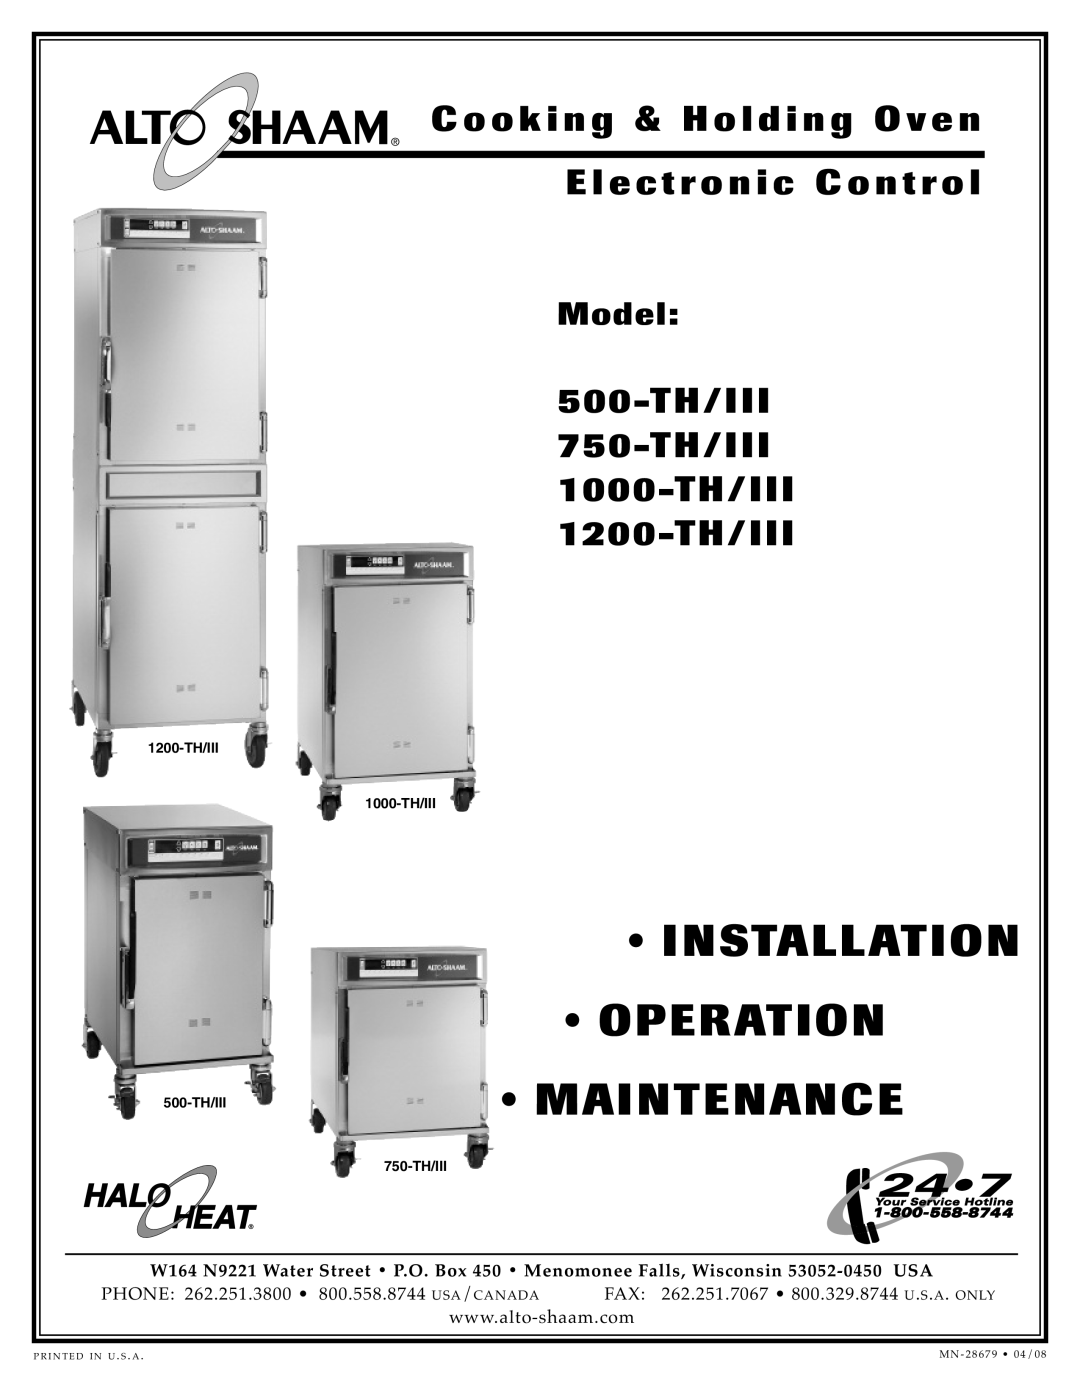 Alto-Shaam 500-TH/III manual Installation, Operation, Maintenance, Cook & Hold Oven, Electronic Control, 300-TH/III, Model 